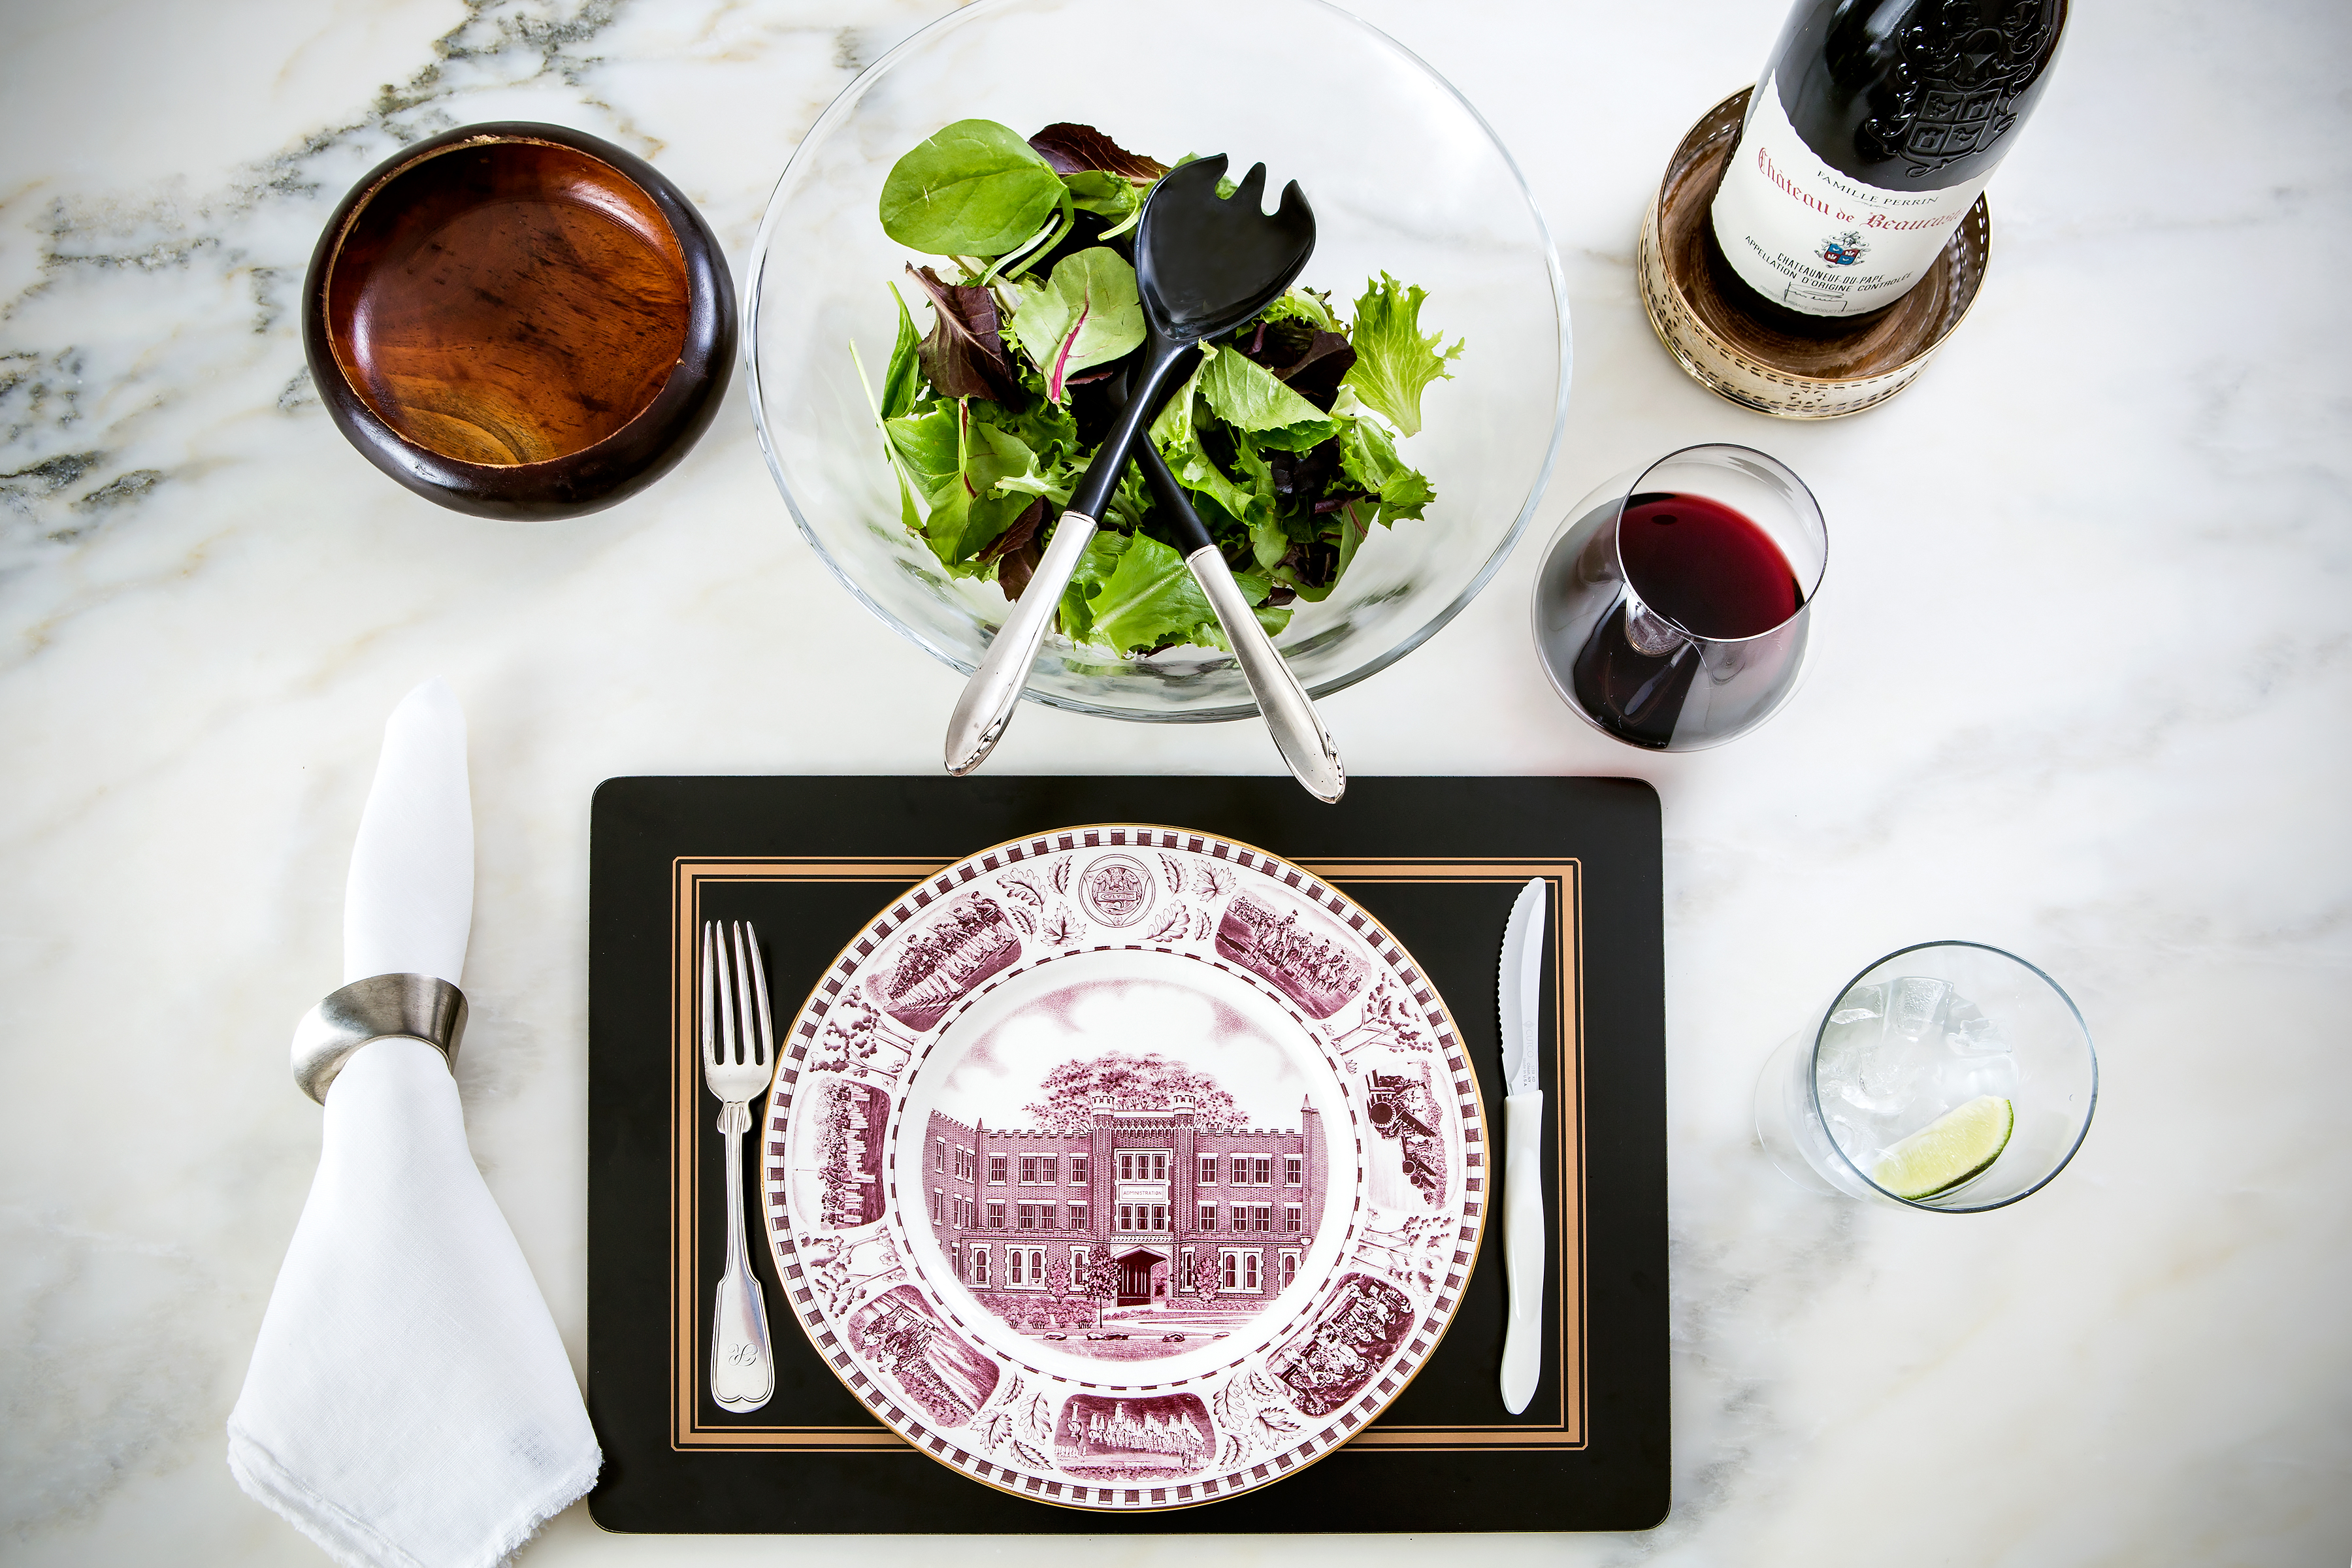 Serve your steak dinner on an Old English Staffordshire plate, easily paired with red wine in a Riedel stemless glass. Salad can be tossed tableside in a Juliska Carina bowl, non(e)such.
